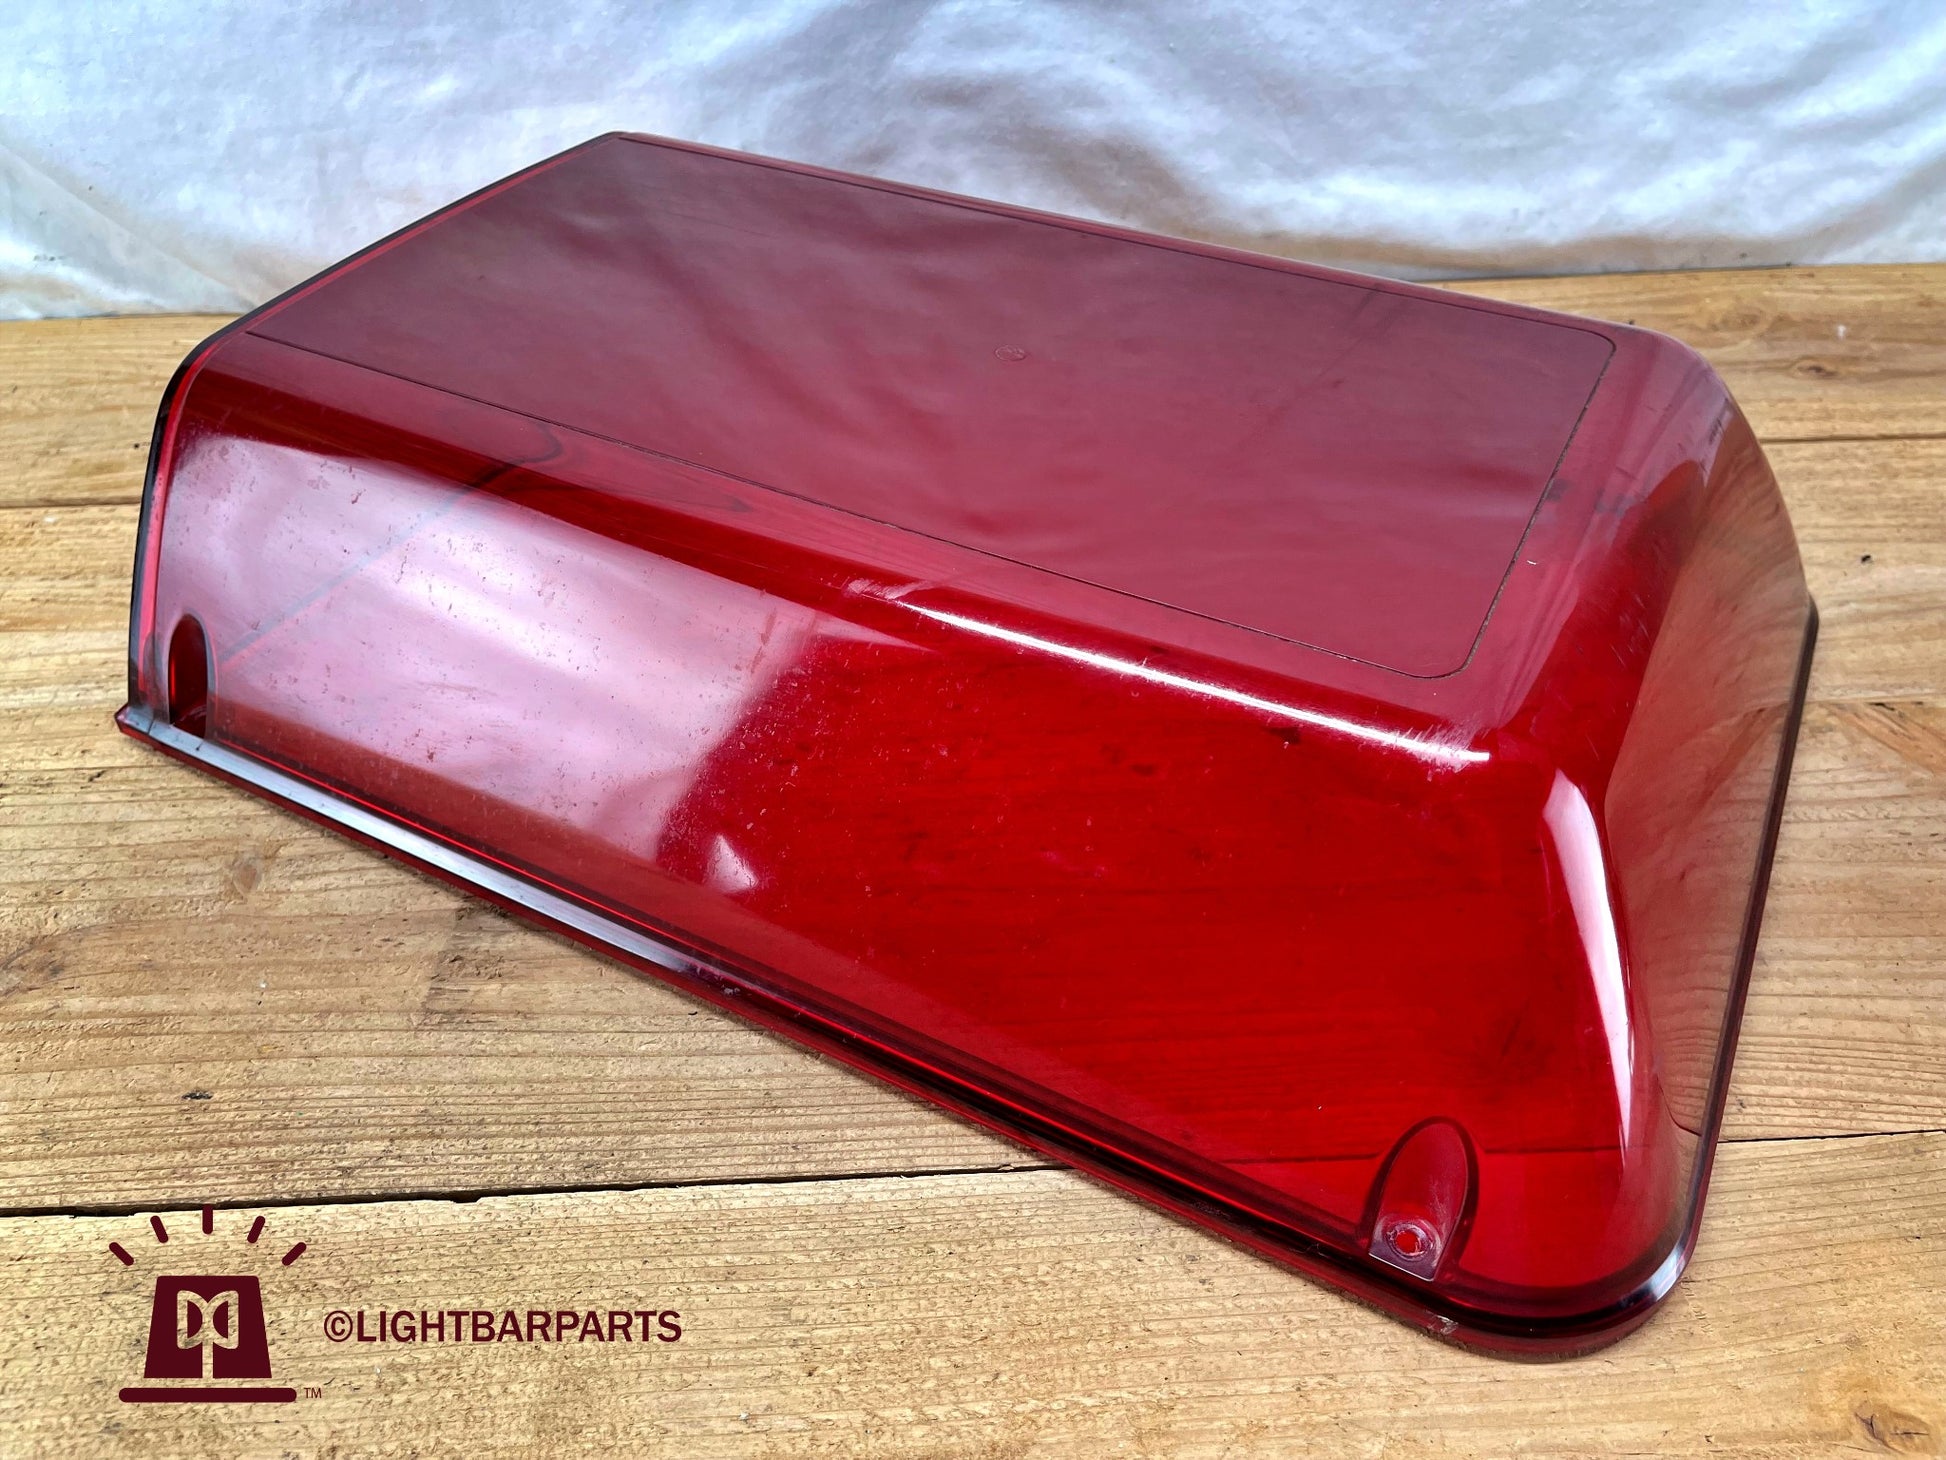 Federal Signal StreetHawk Lightbar - Red Dome Cover Lens with Internal Mirror